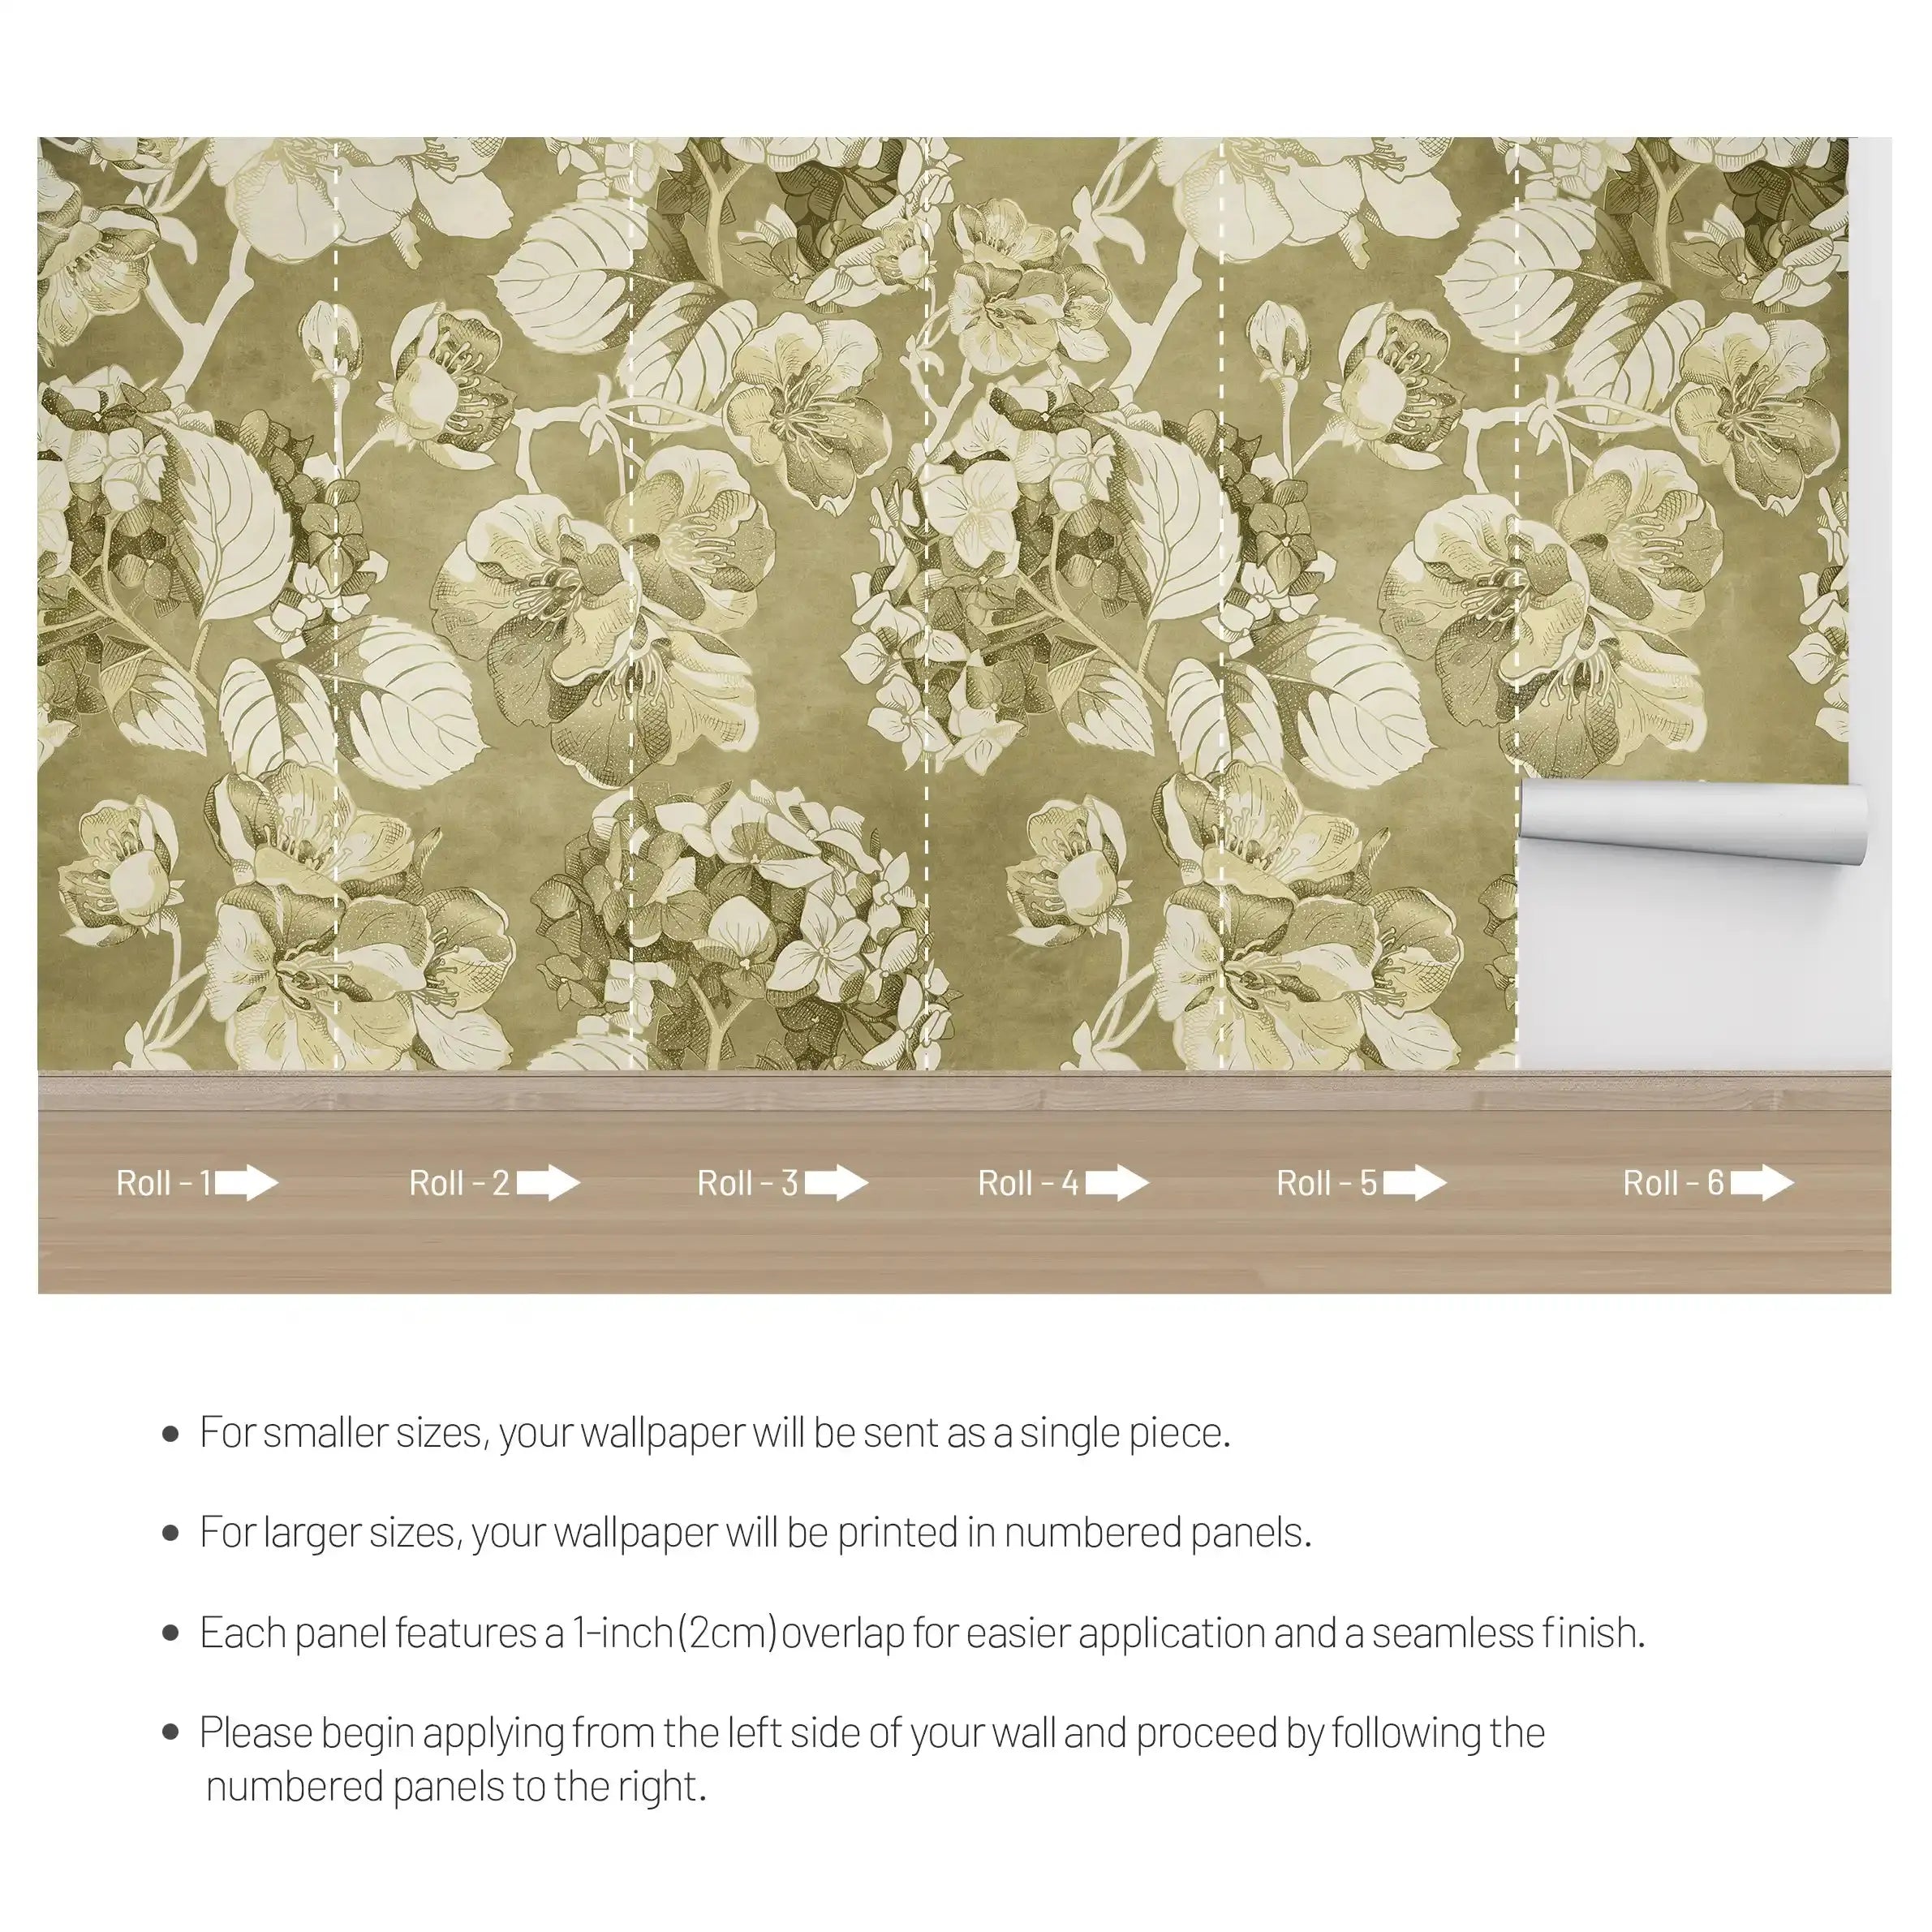 3036-D / Vintage Floral Mural Wallpaper: Green and Beige Art Style, Easy Install for Accent Wall Decor and Bathroom - Artevella